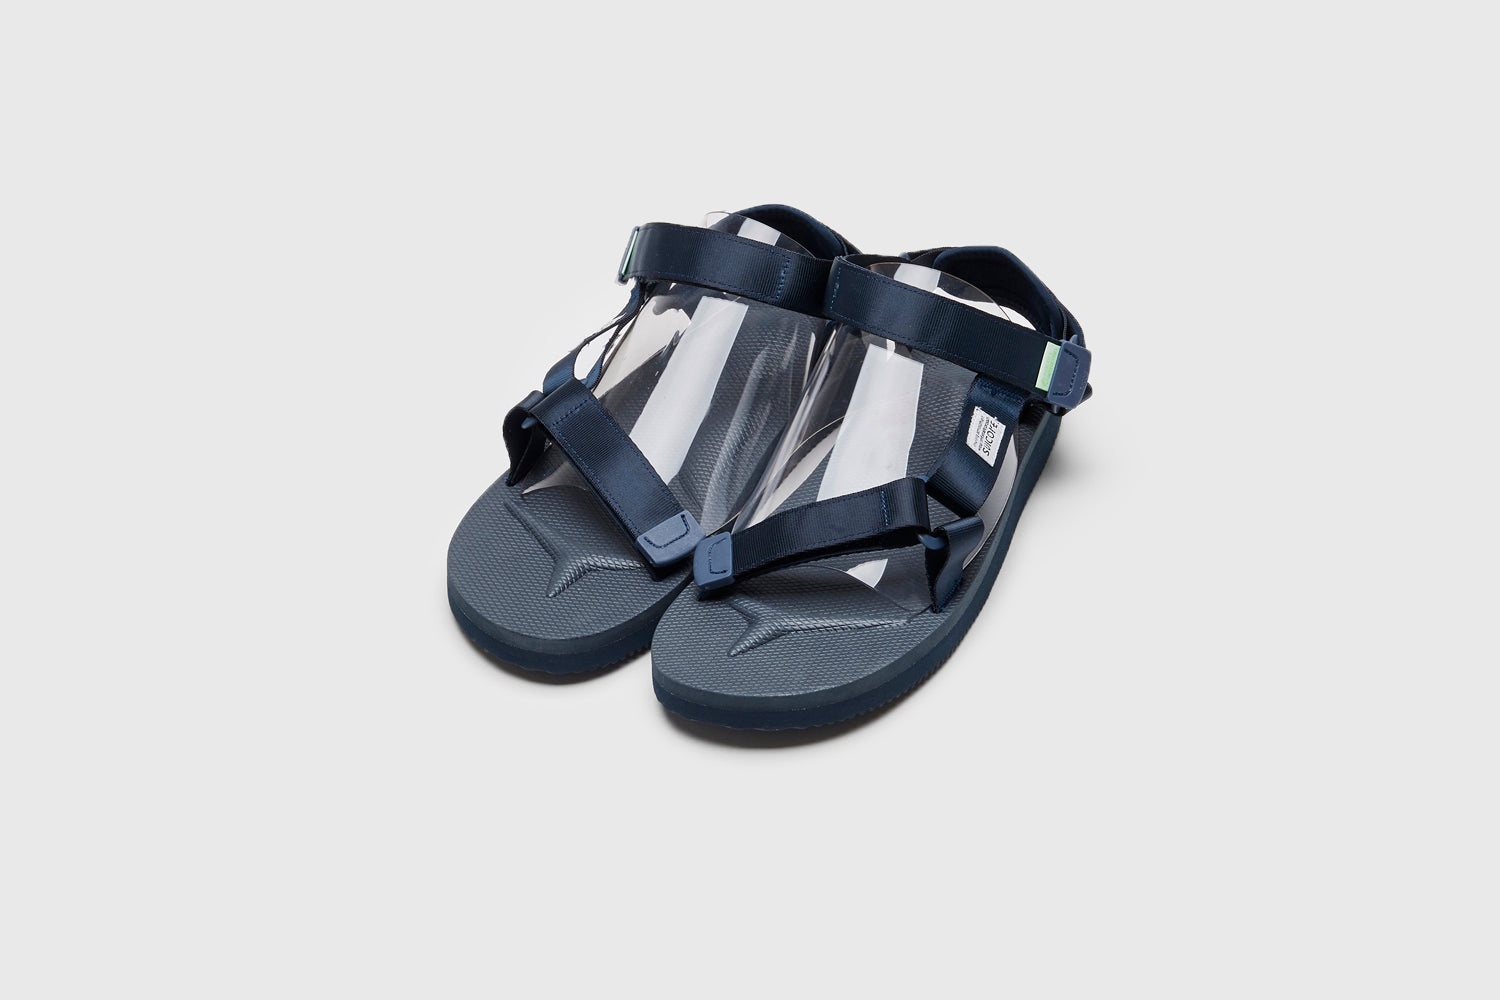 SUICOKE DEPA-Cab sandals with navy nylon upper, navy midsole and sole, strap and logo patch. From Spring/Summer 2023 collection on eightywingold Web Store, an official partner of SUICOKE. OG-022CAB NAVY